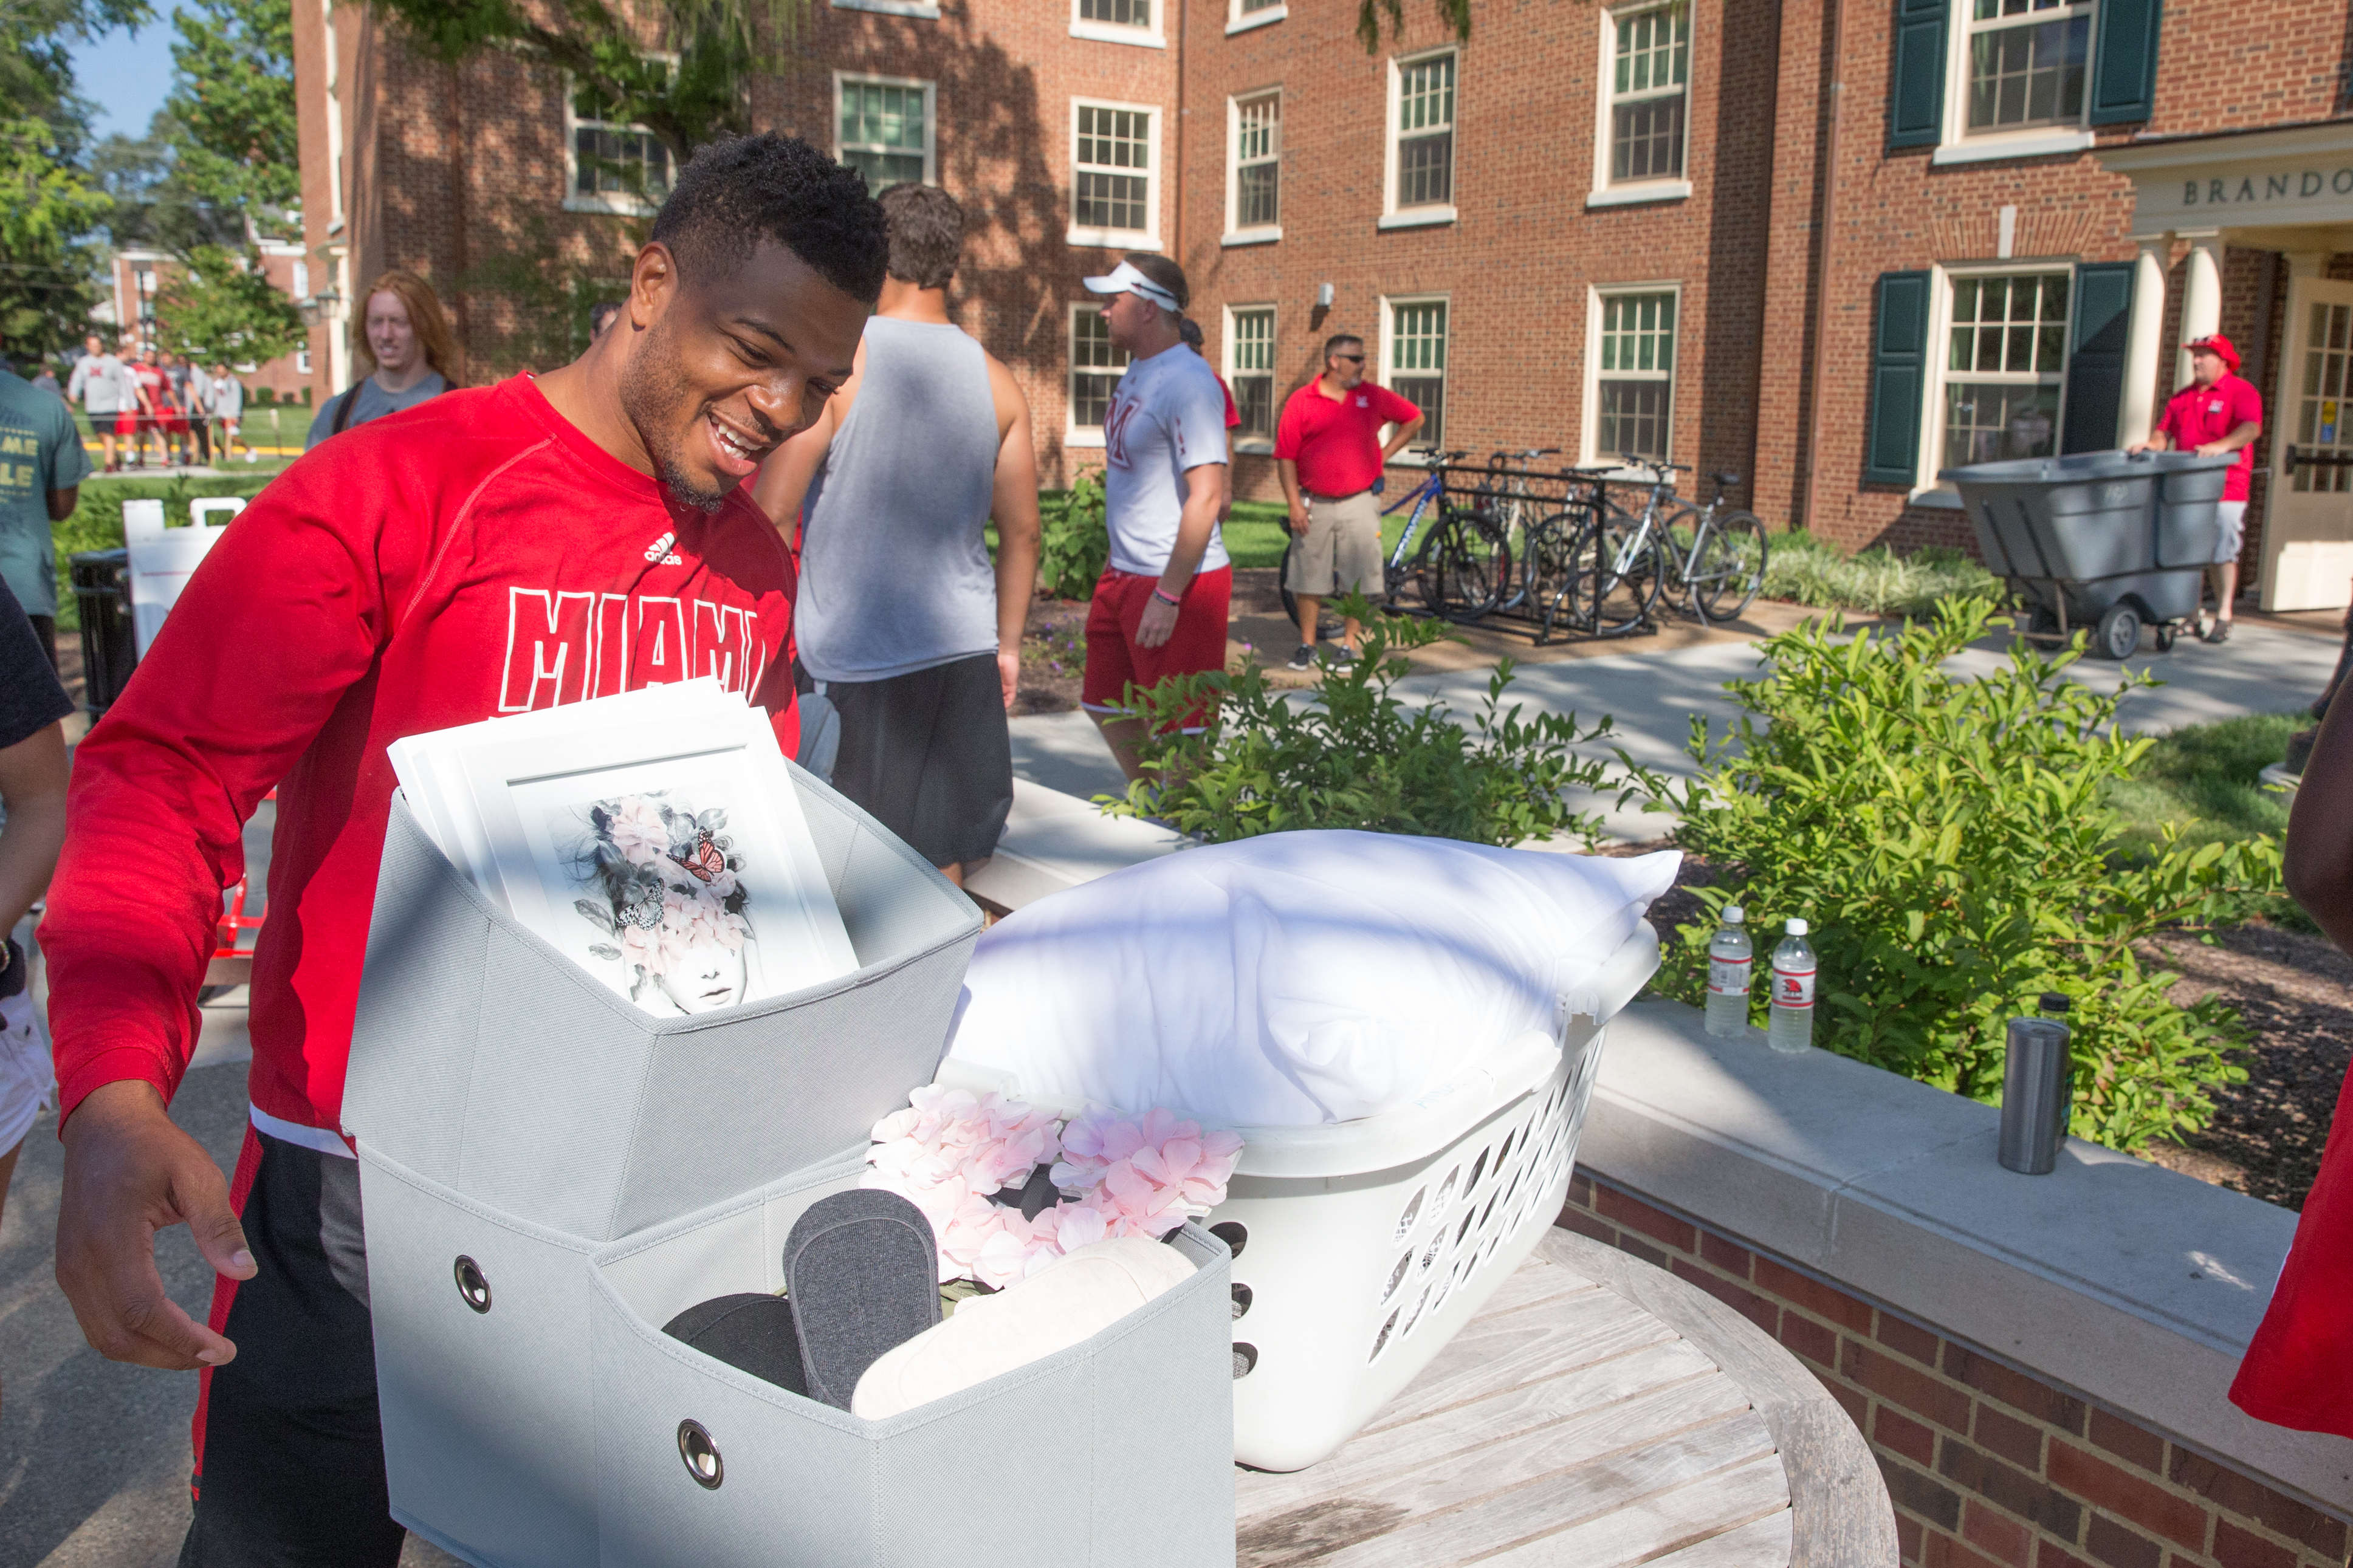  Student in Miami shirt collecting items on a table to help a student move in to the residence halls